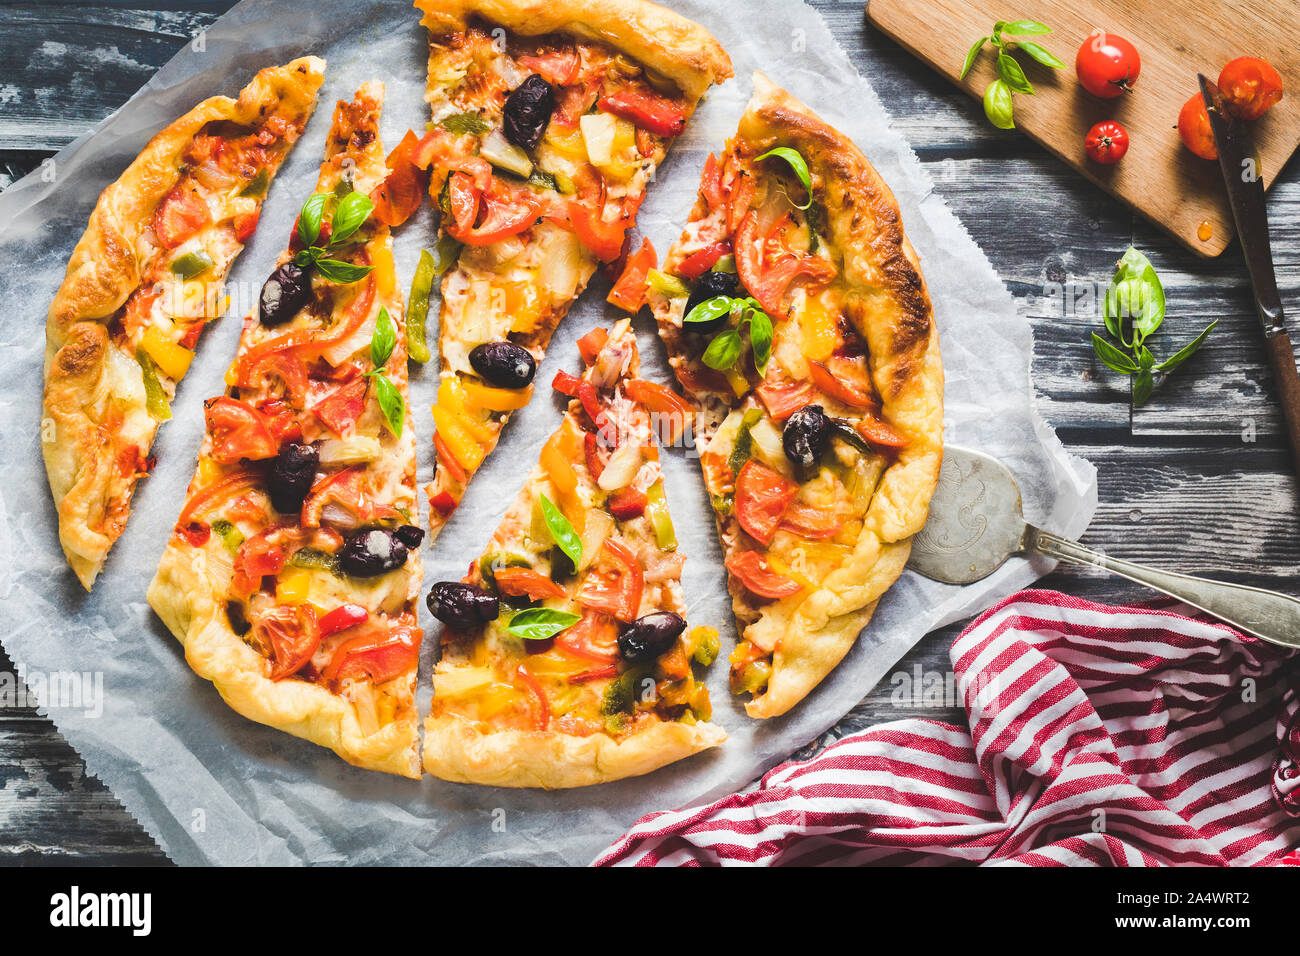 Homemade pizza with vegetables on a dark background. The pizza is cut in pieces in irregular size and is viewed from above.  With a red and white napk Stock Photo